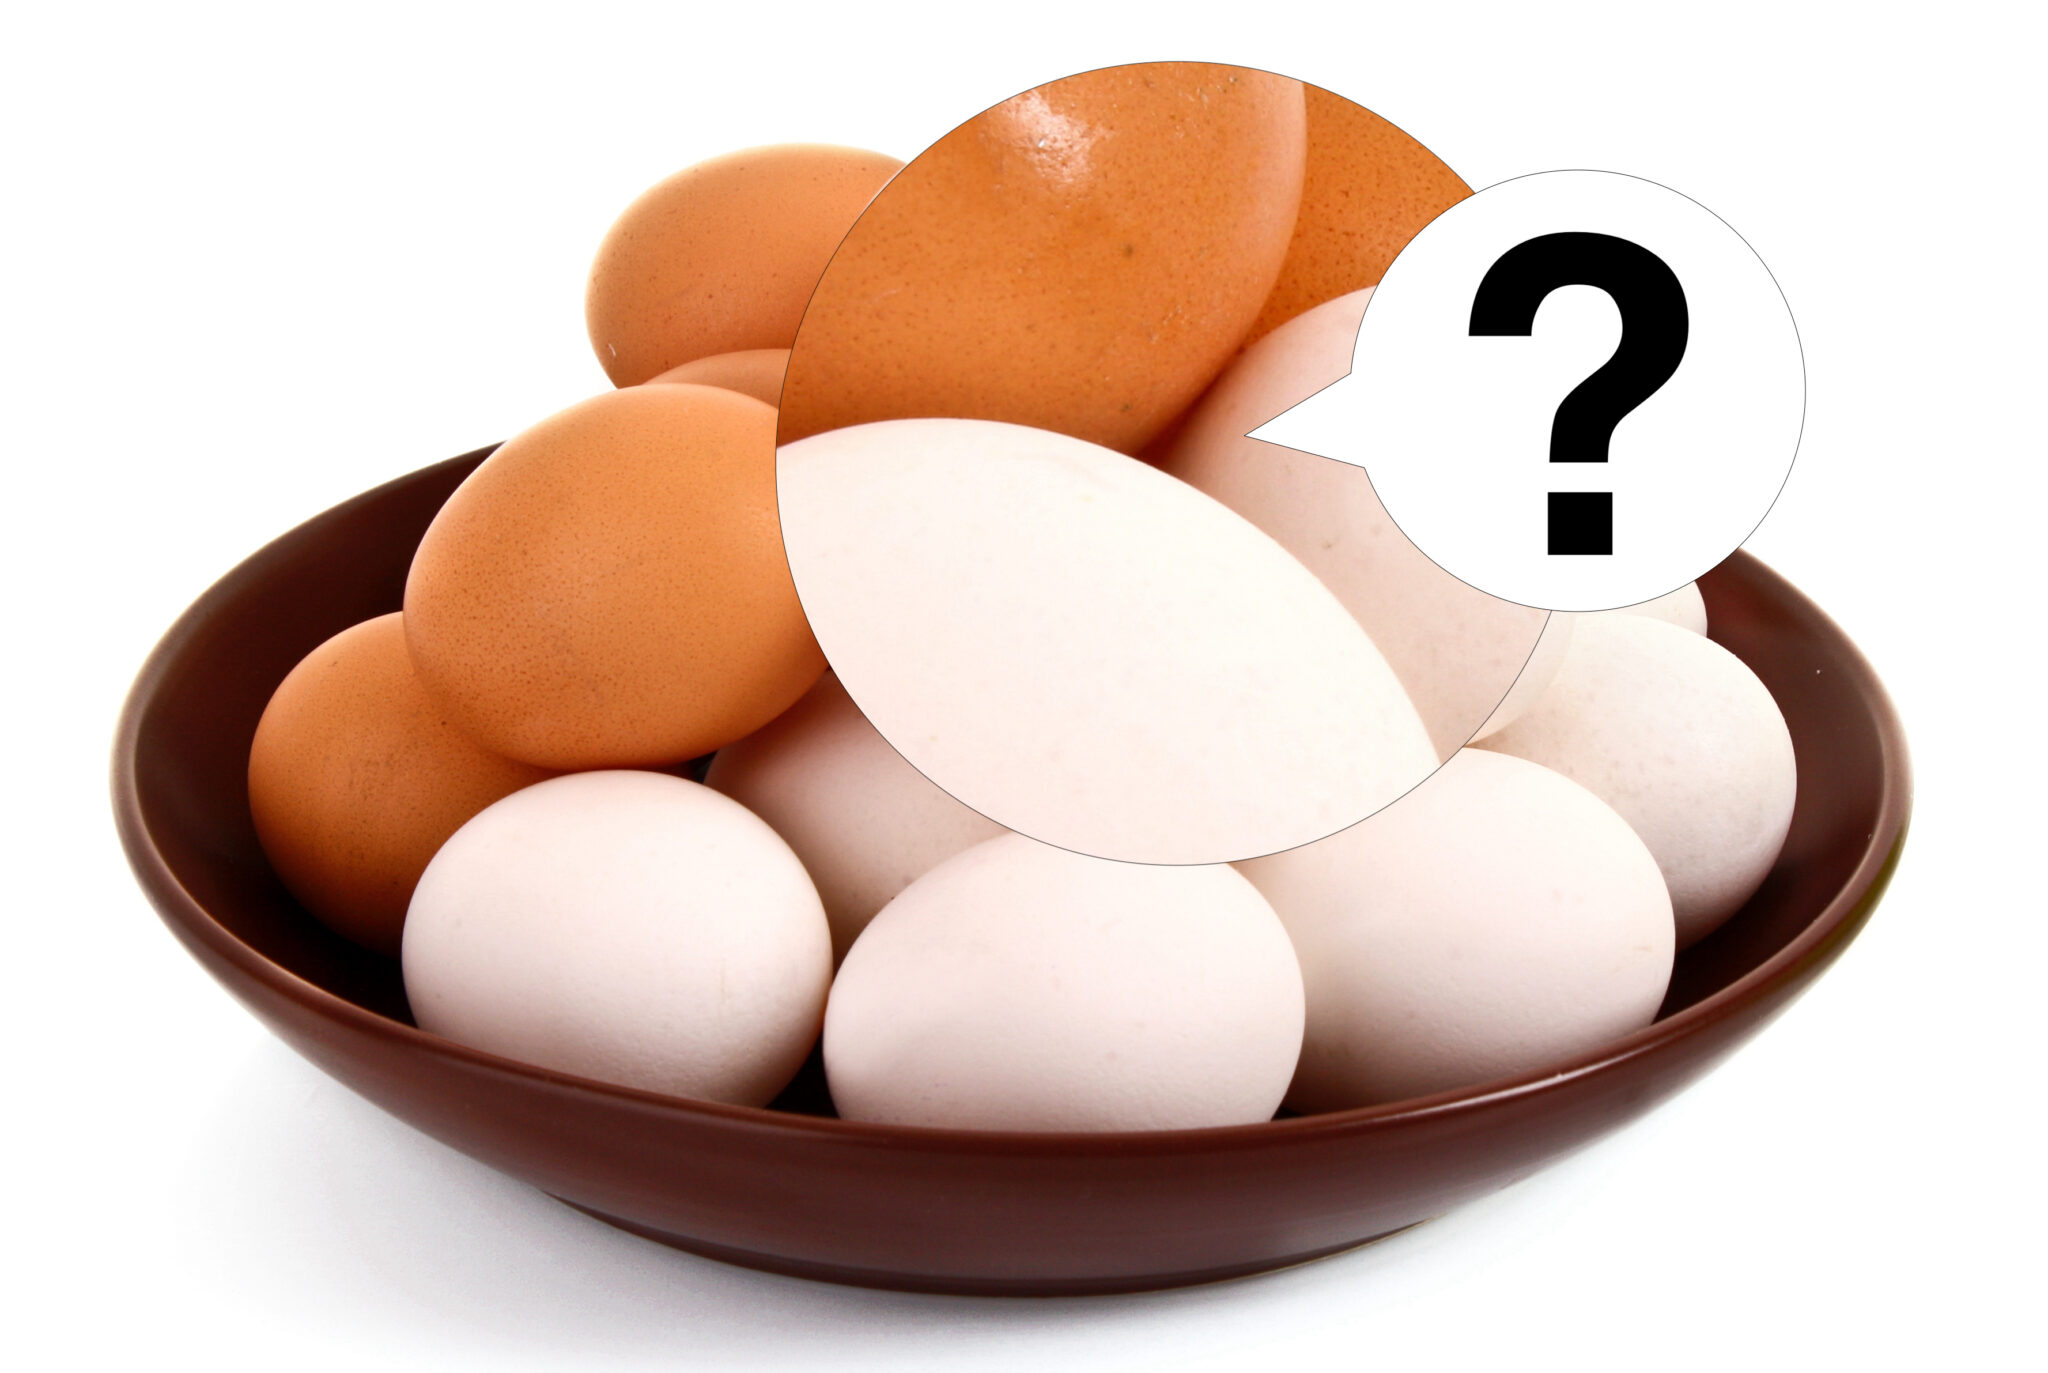 What's The Difference Between Brown And White Eggs?